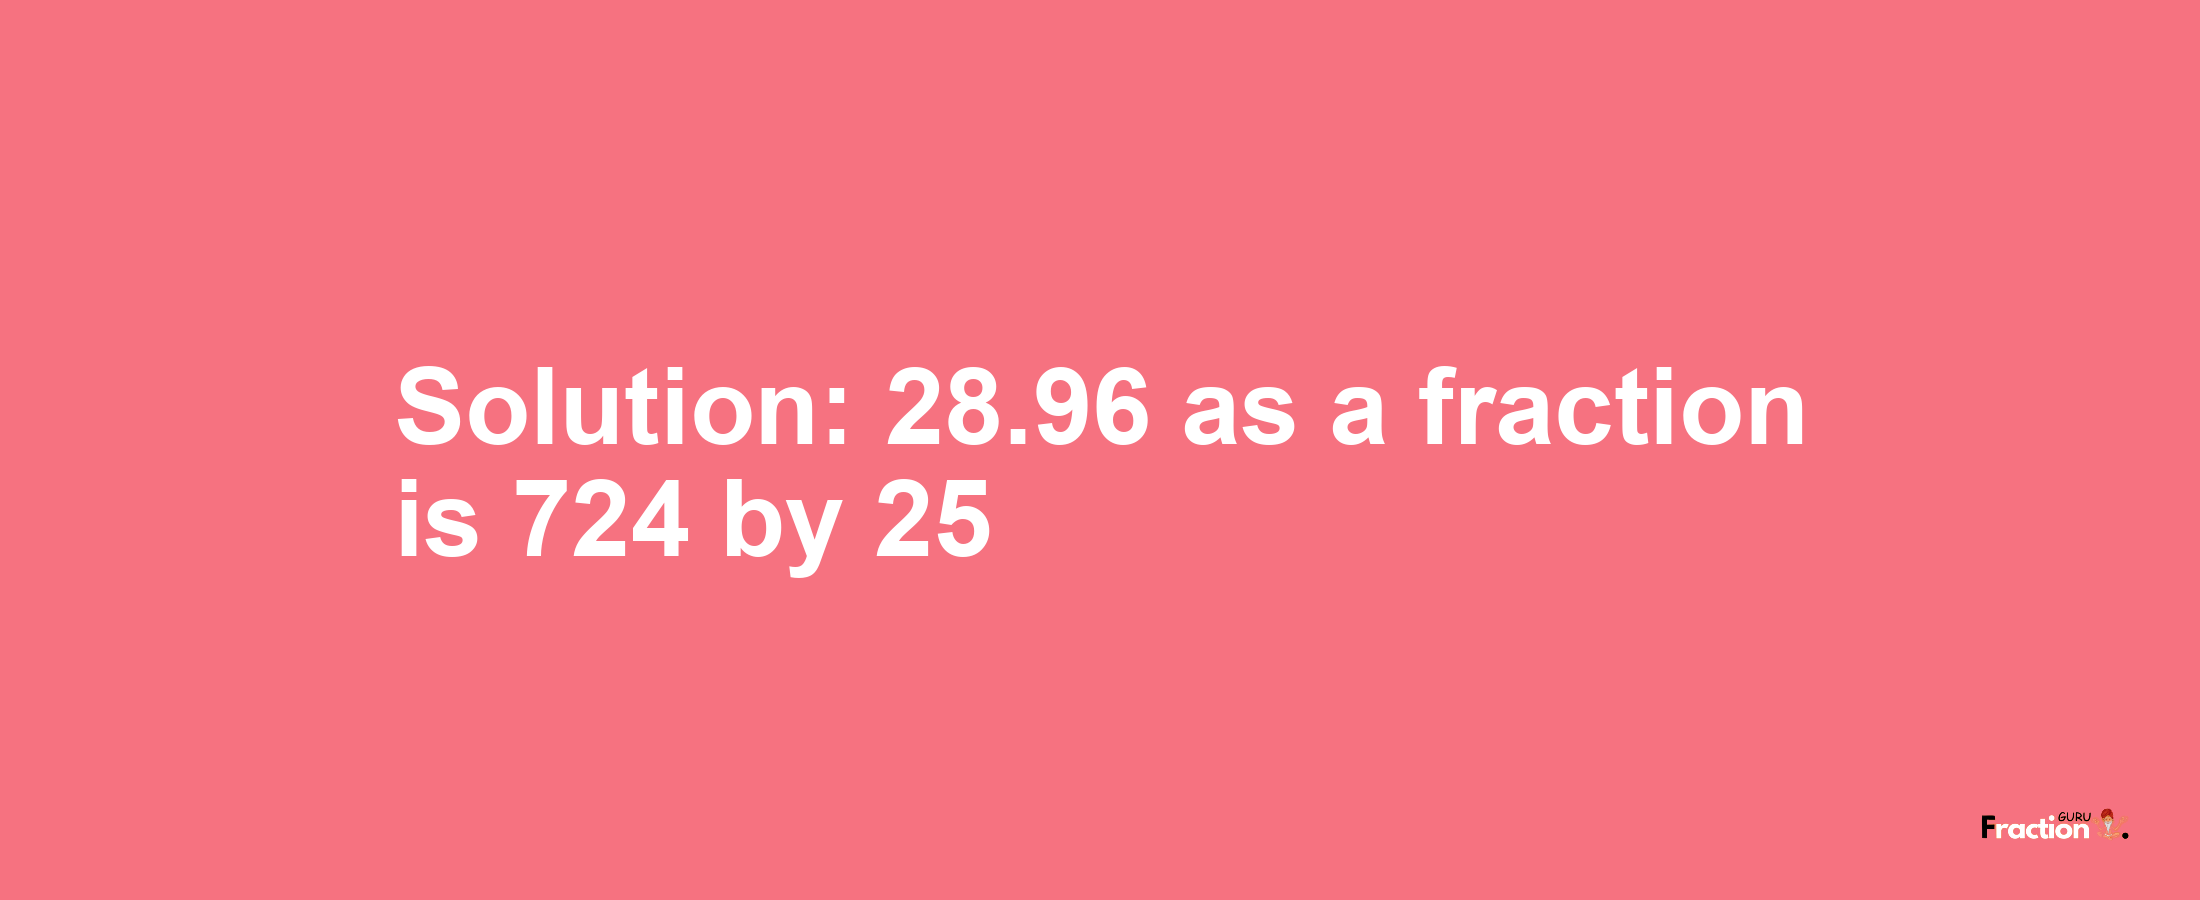 Solution:28.96 as a fraction is 724/25